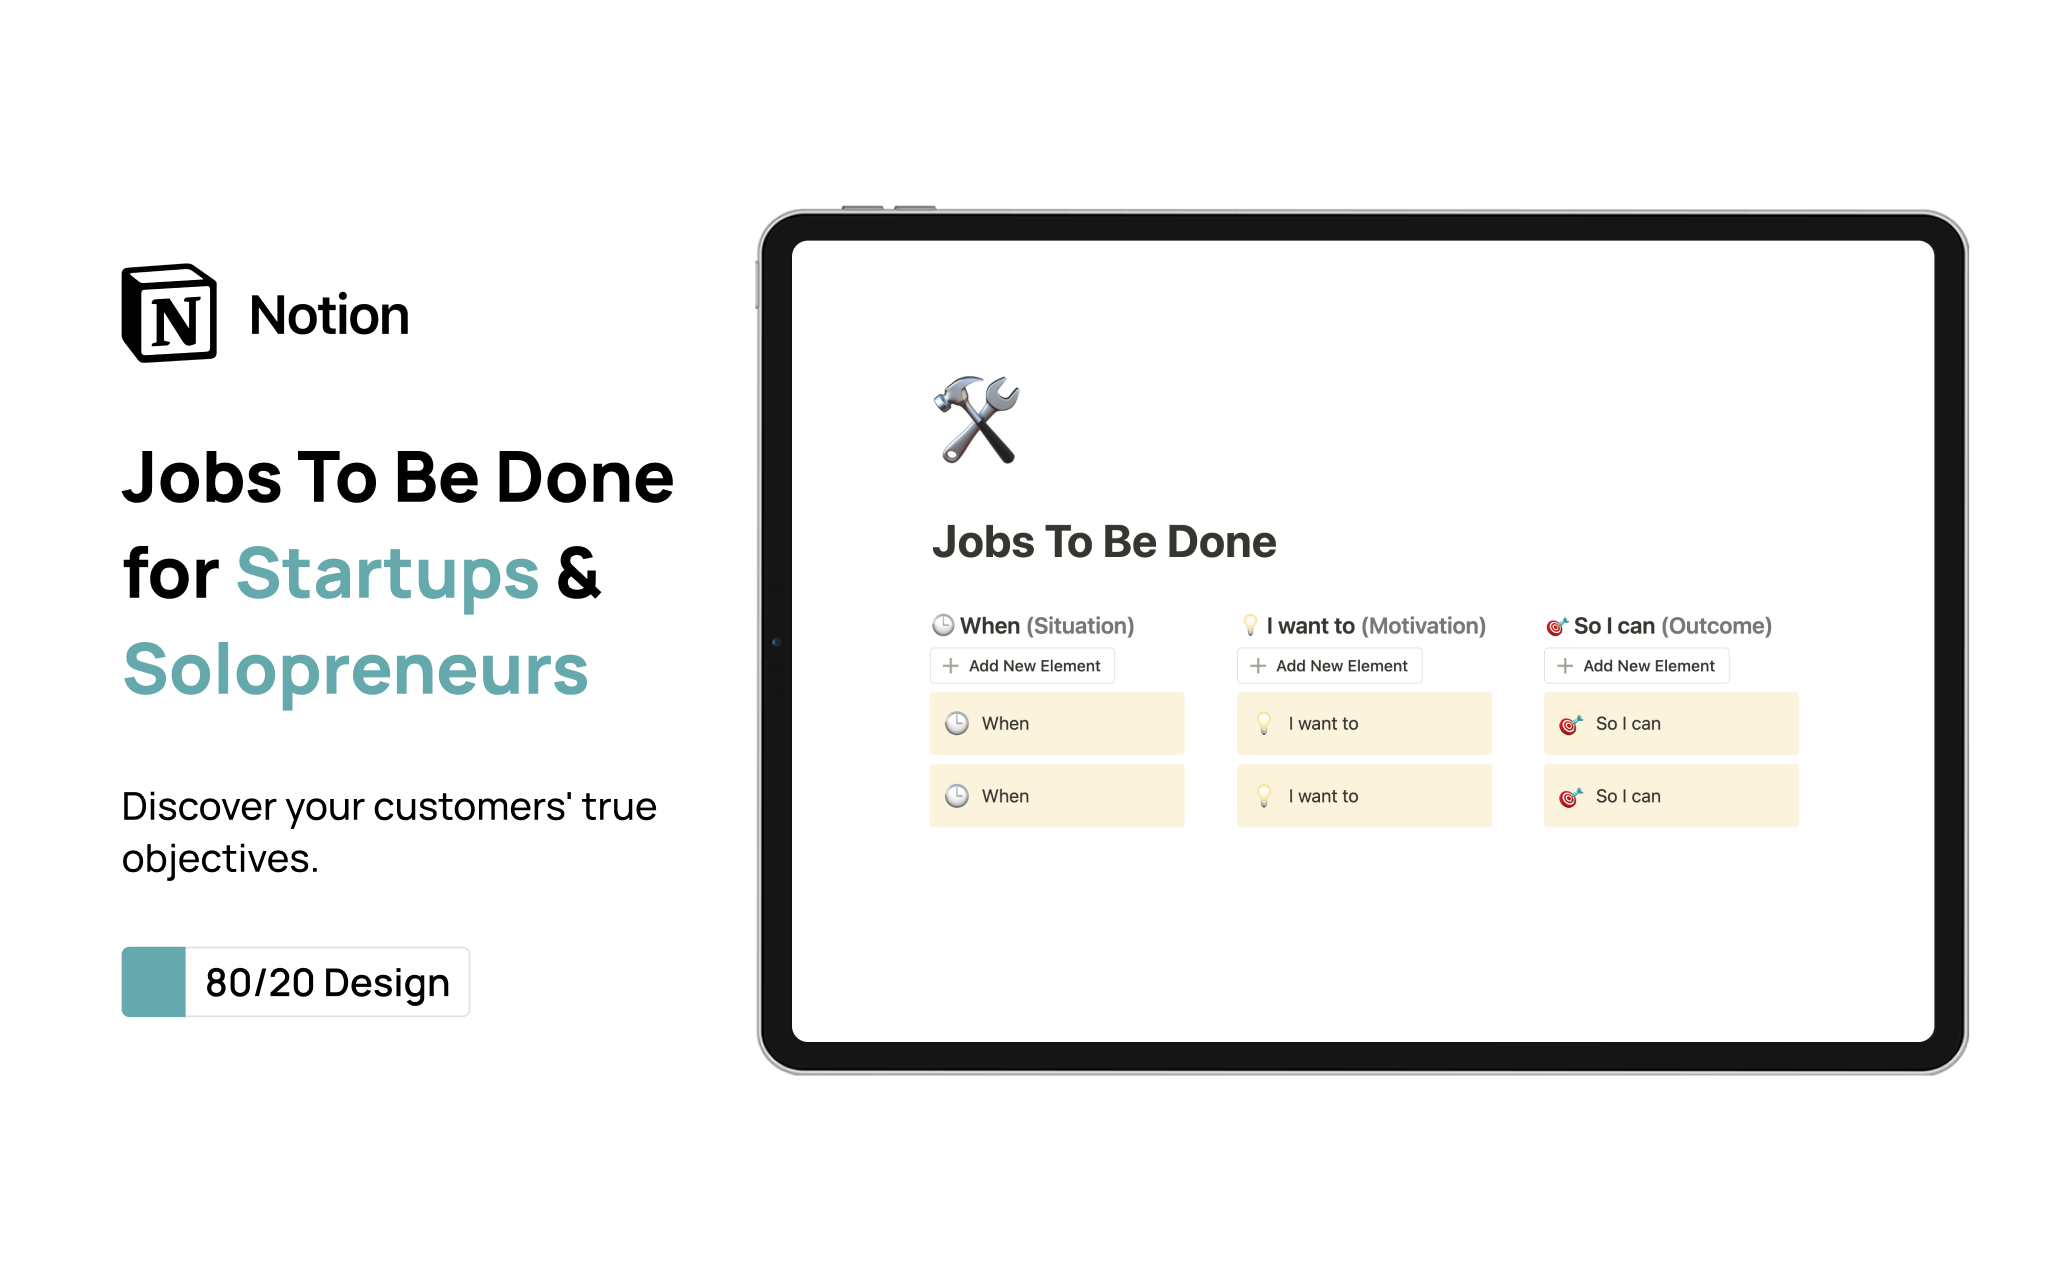 Refine your product strategy with "🔍 Jobs To Be Done" by 80/20 Design. Uncover core customer needs for precise value creation. Part of our 'Product Manual' series, it's a must-have for startups. Visit www.8020d.com for more resources 🌟.